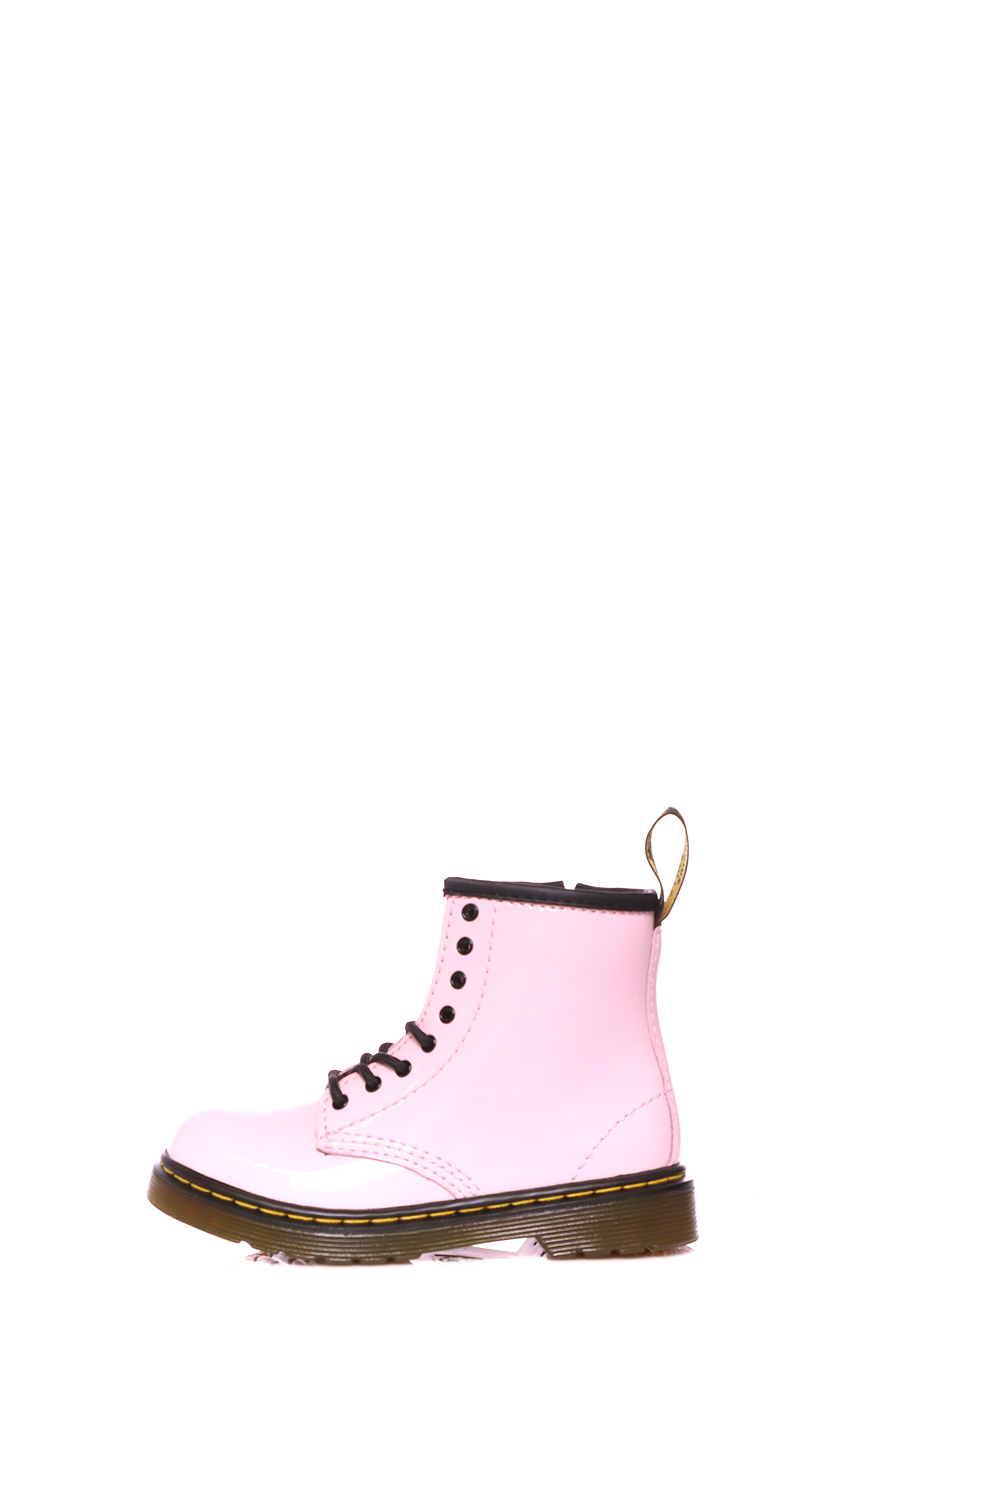 DR.MARTENS - Βρεφικά μποτάκια DR.MARTENS Brooklee Infants Lace Boot ροζ Παιδικά/Baby/Παπούτσια/Μπότες-Μποτάκια